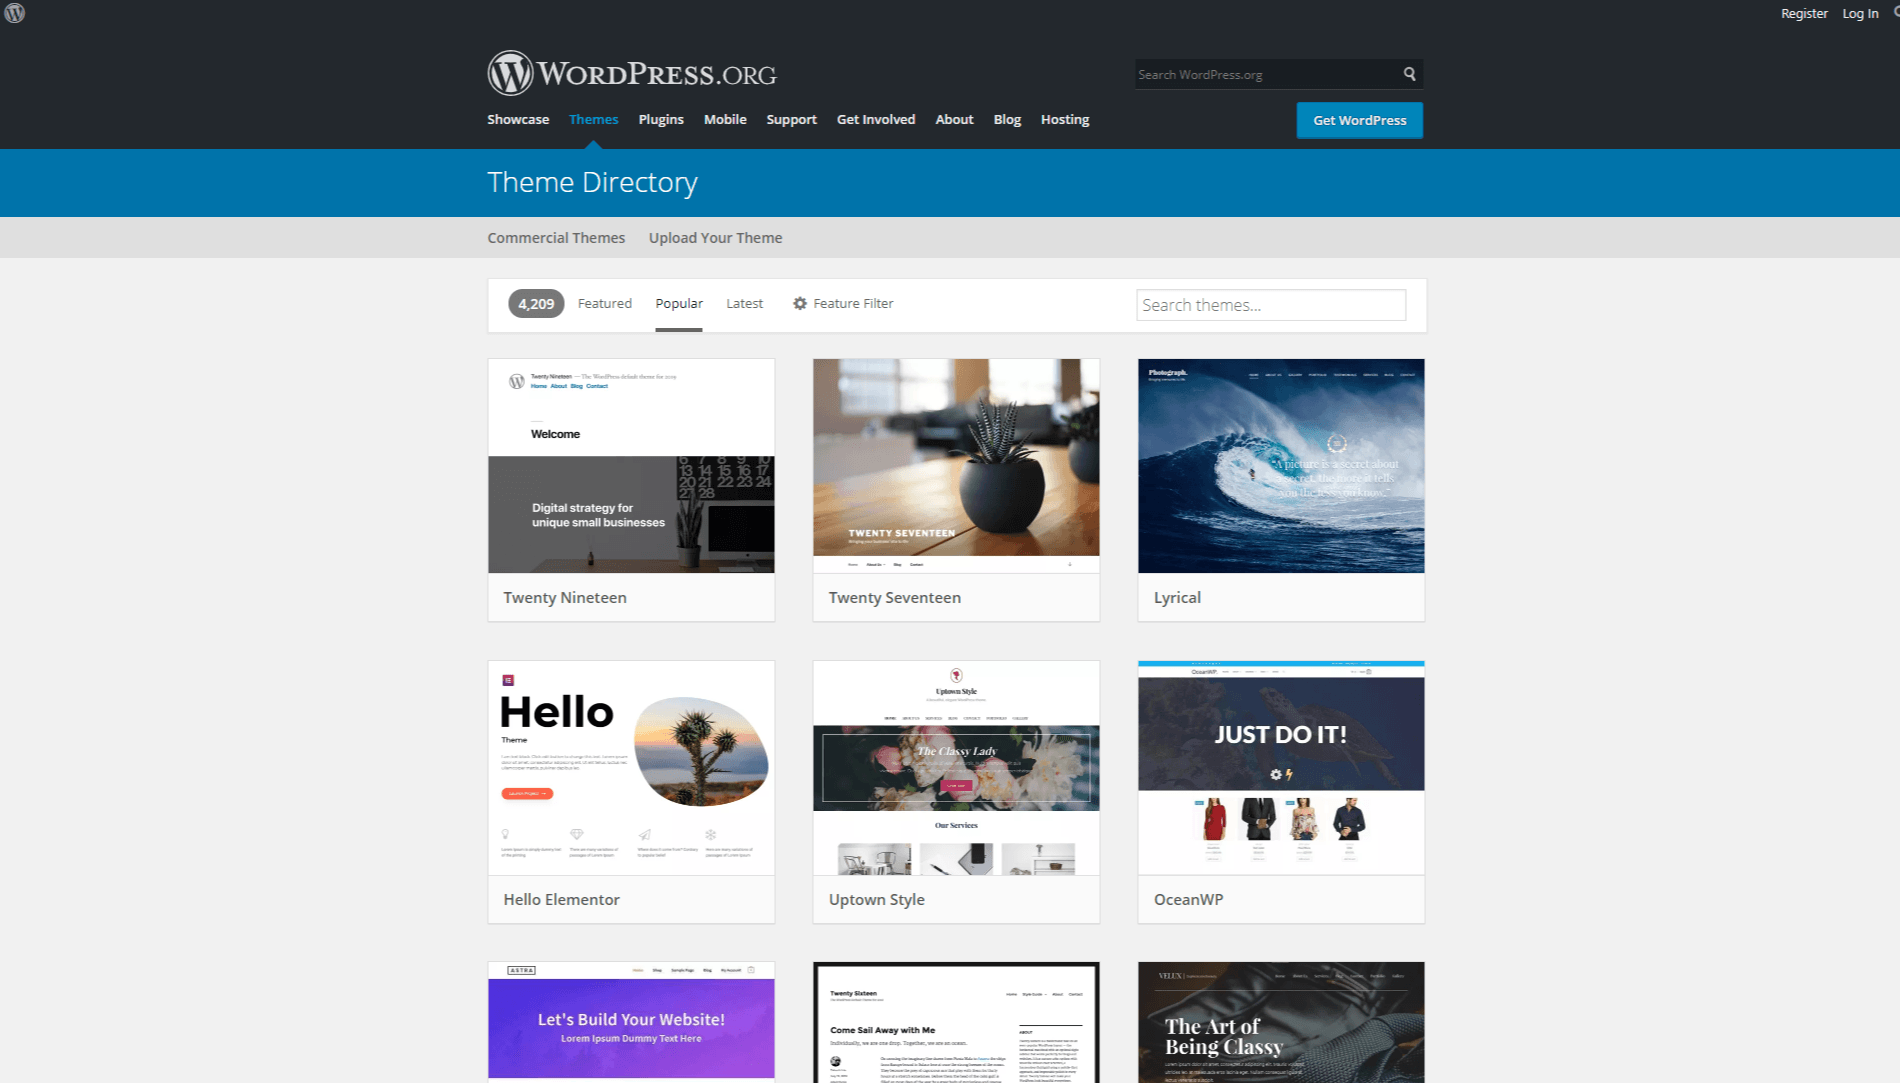 What Are the Differences Between Free and Premium WordPress Themes?